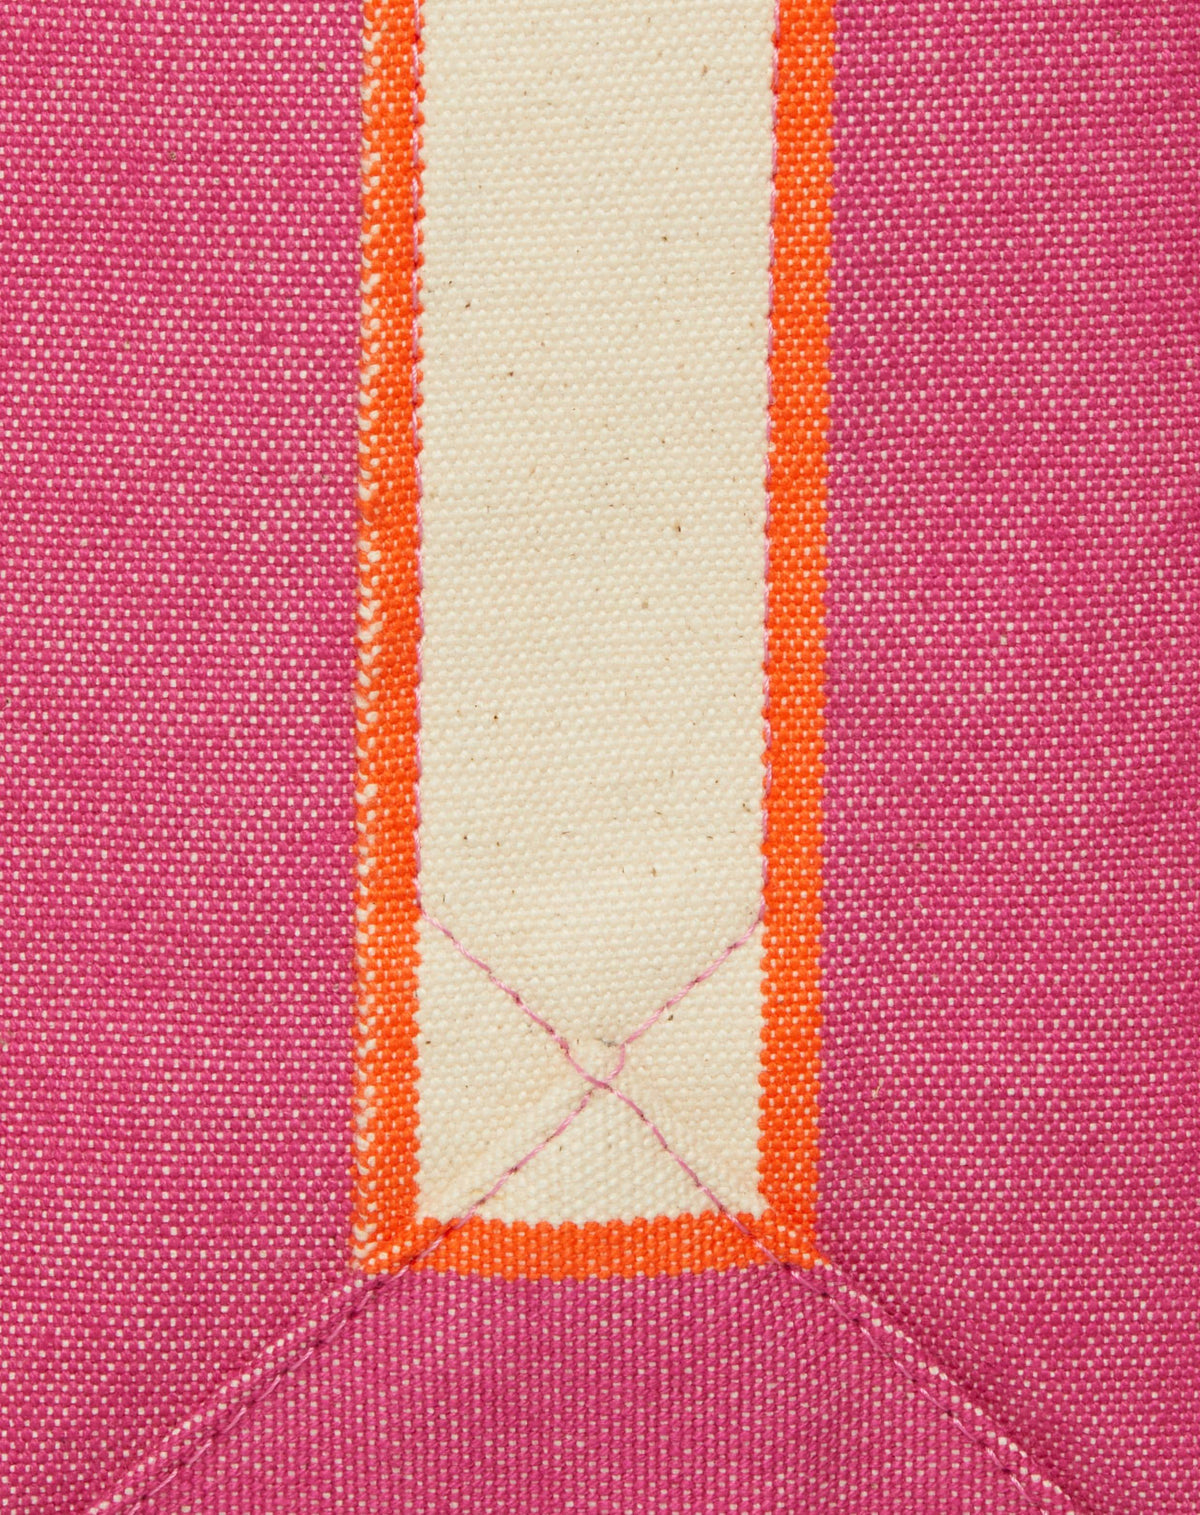 Close-up image of fuchsia canvas with contrasting stripe and stitching detail.